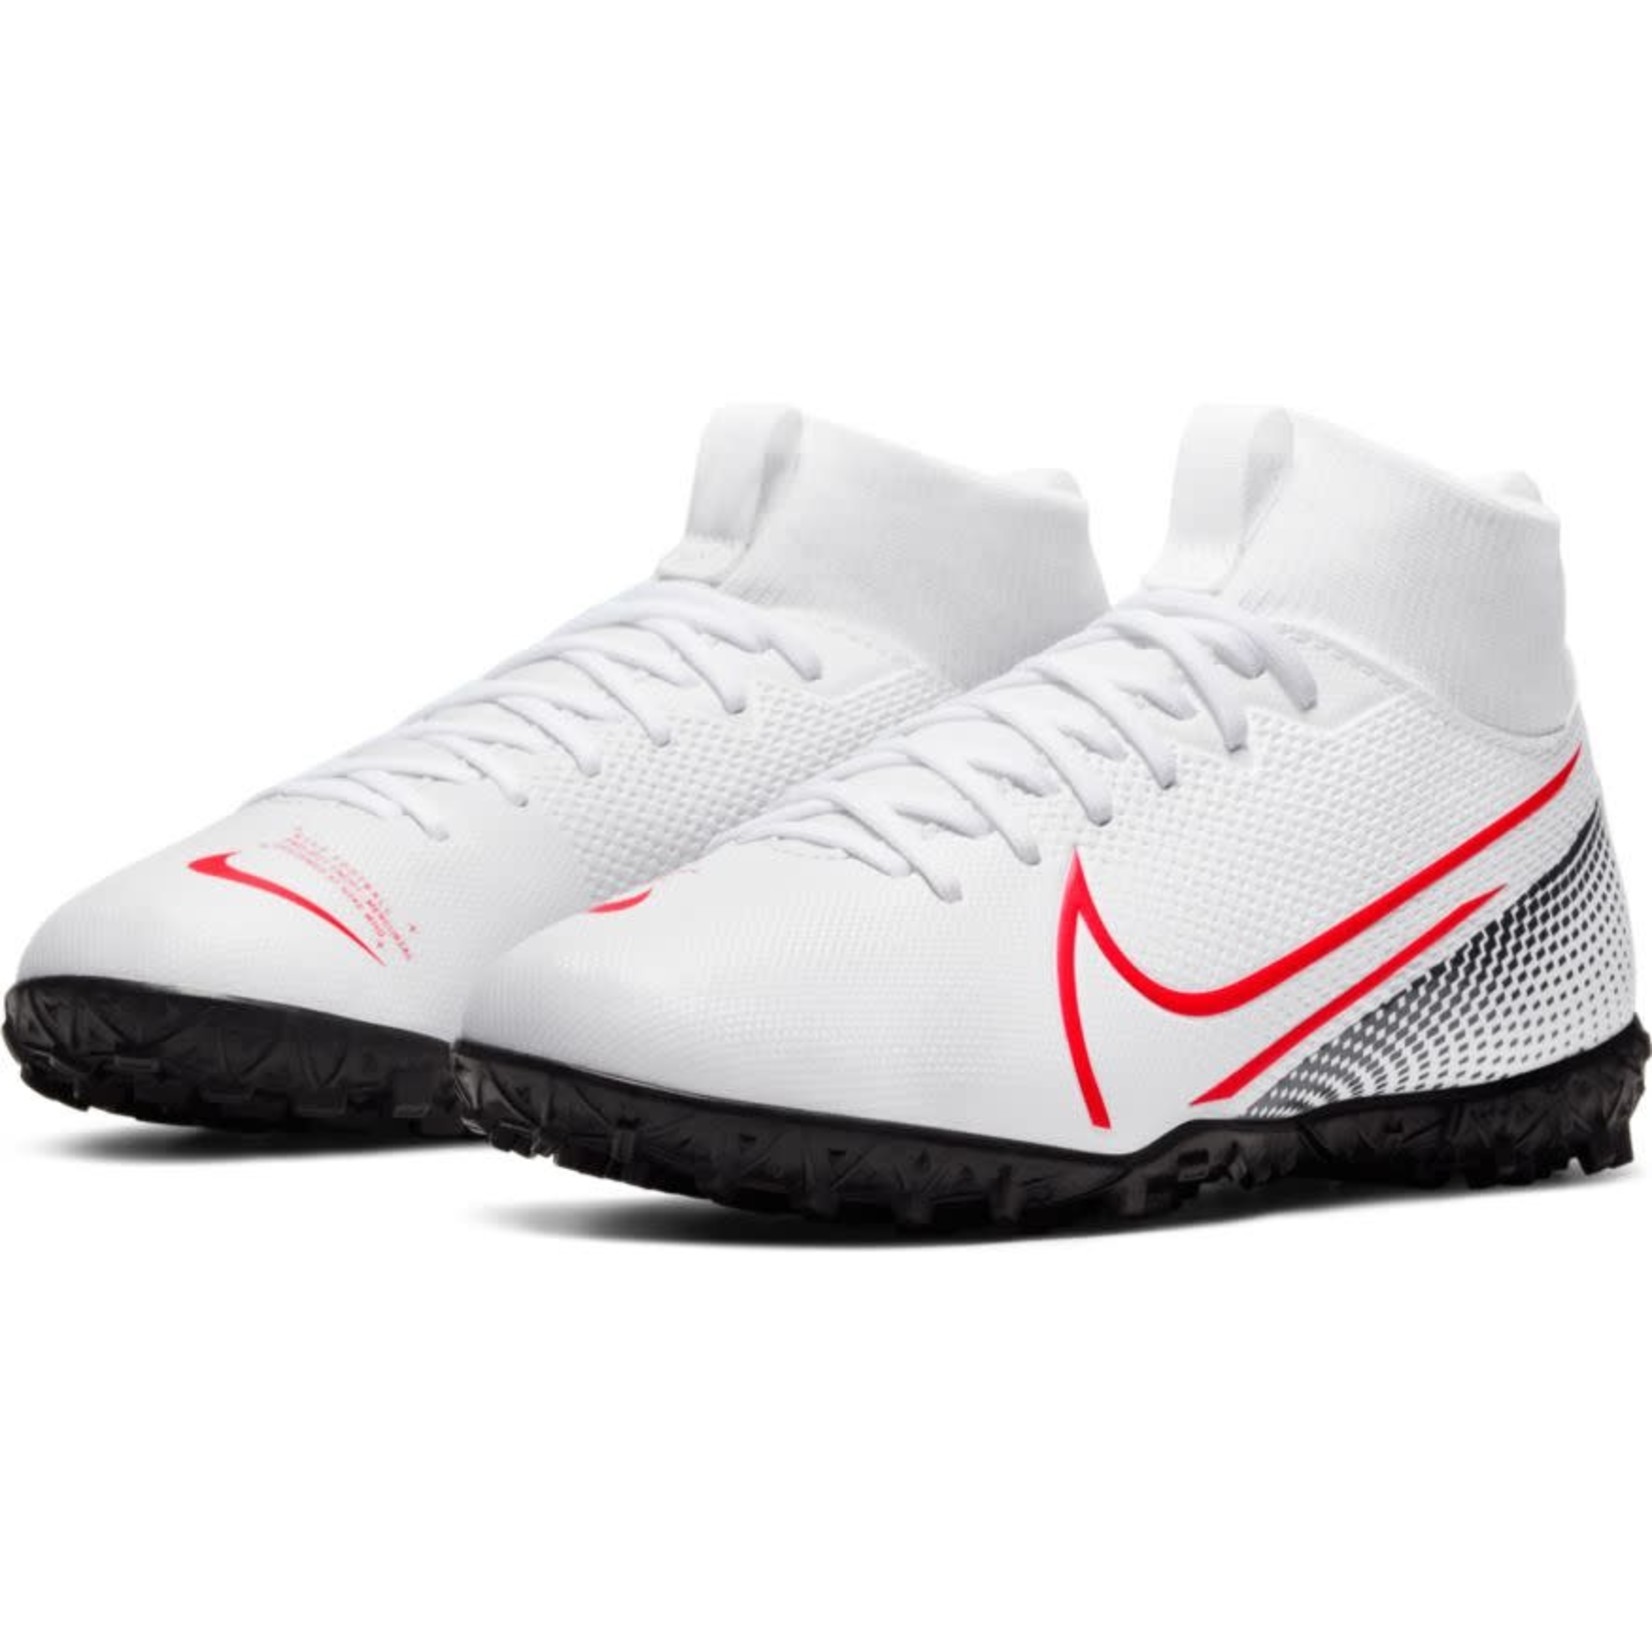 NIKE MERCURIAL SUPERFLY 7 ACADEMY TURF JR (WHITE/RED)